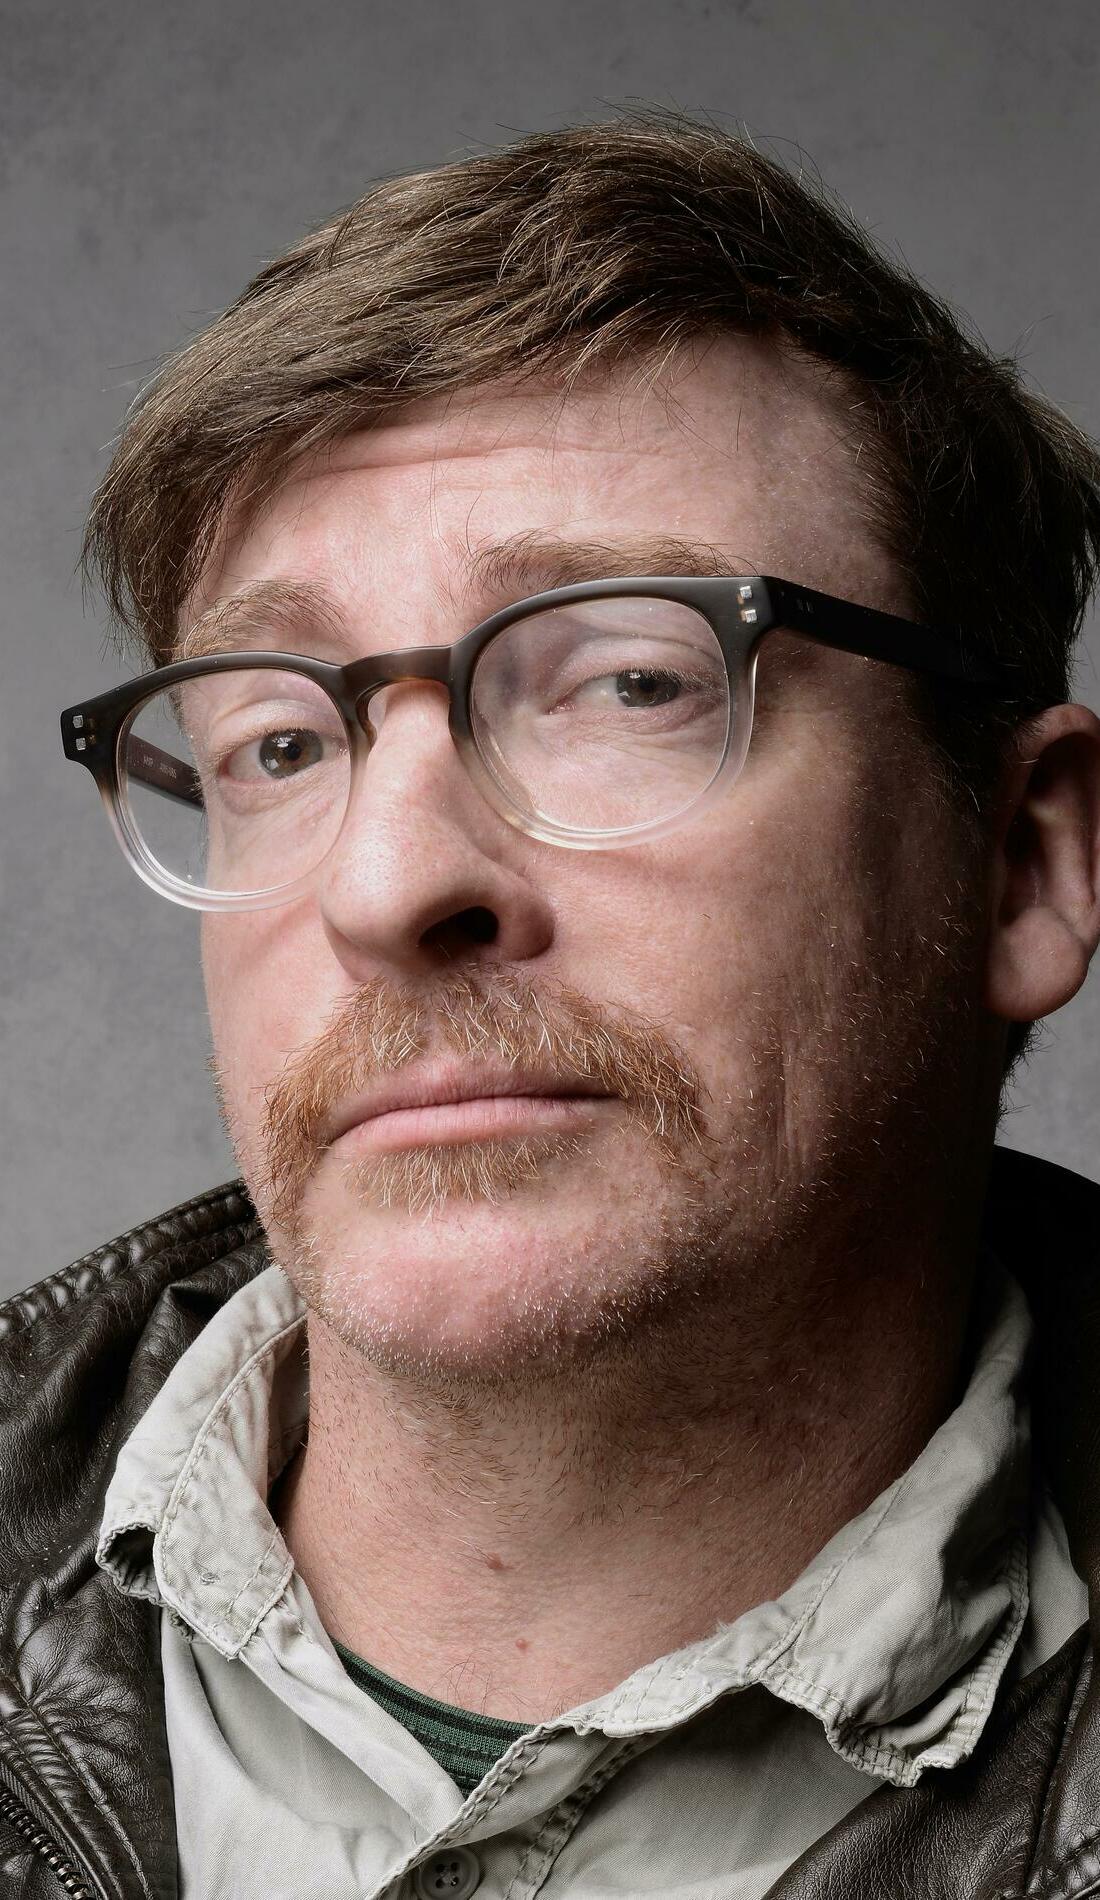 A Rhys Darby live event